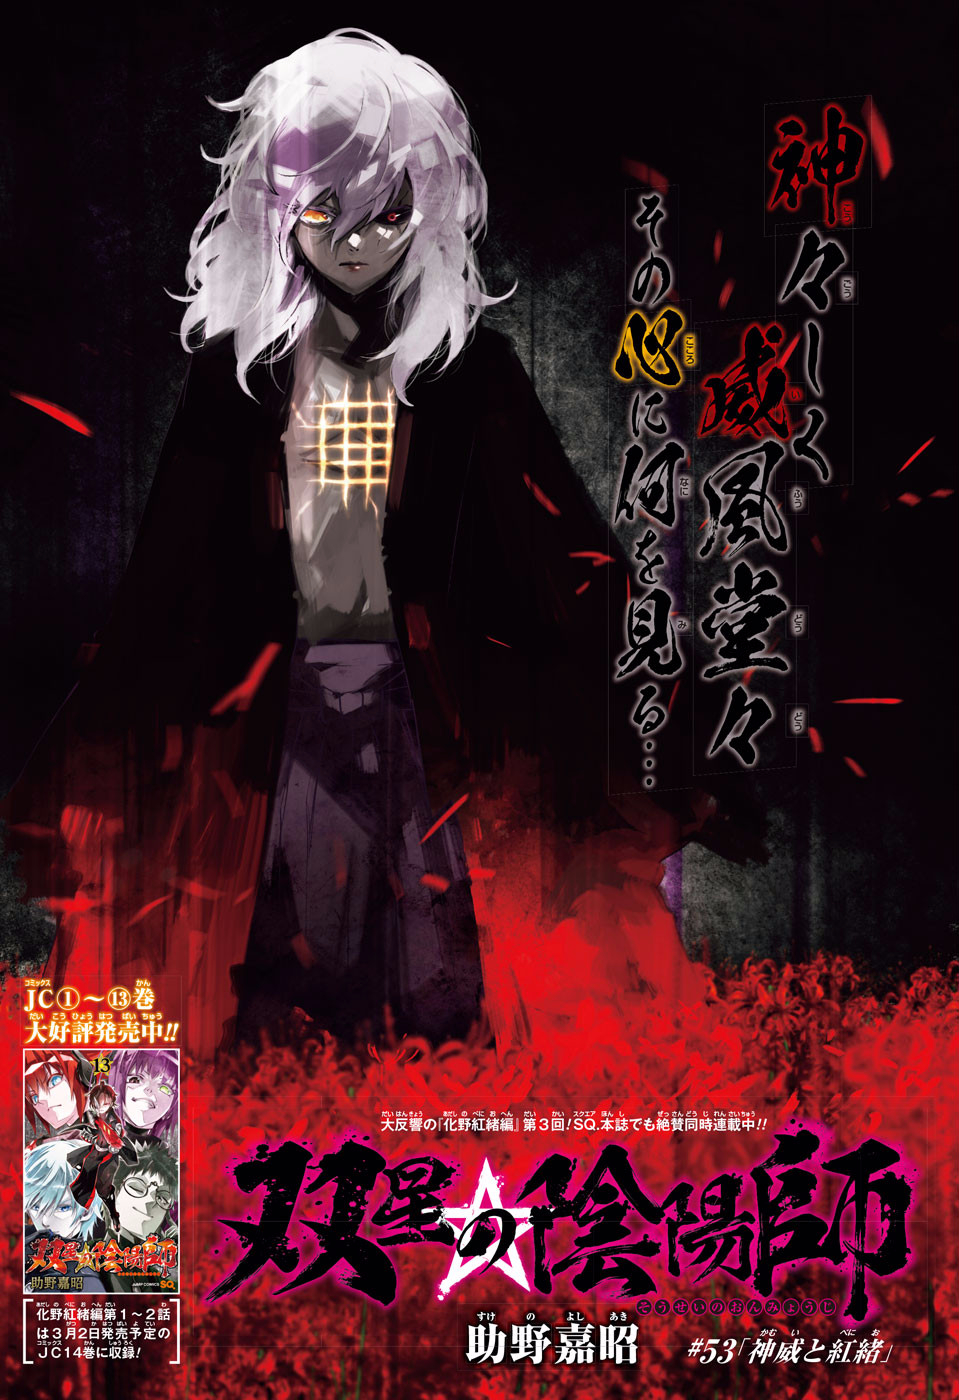 Twin Star Exorcists Manga's Final Arc Will Have 3 Parts - Anime Corner